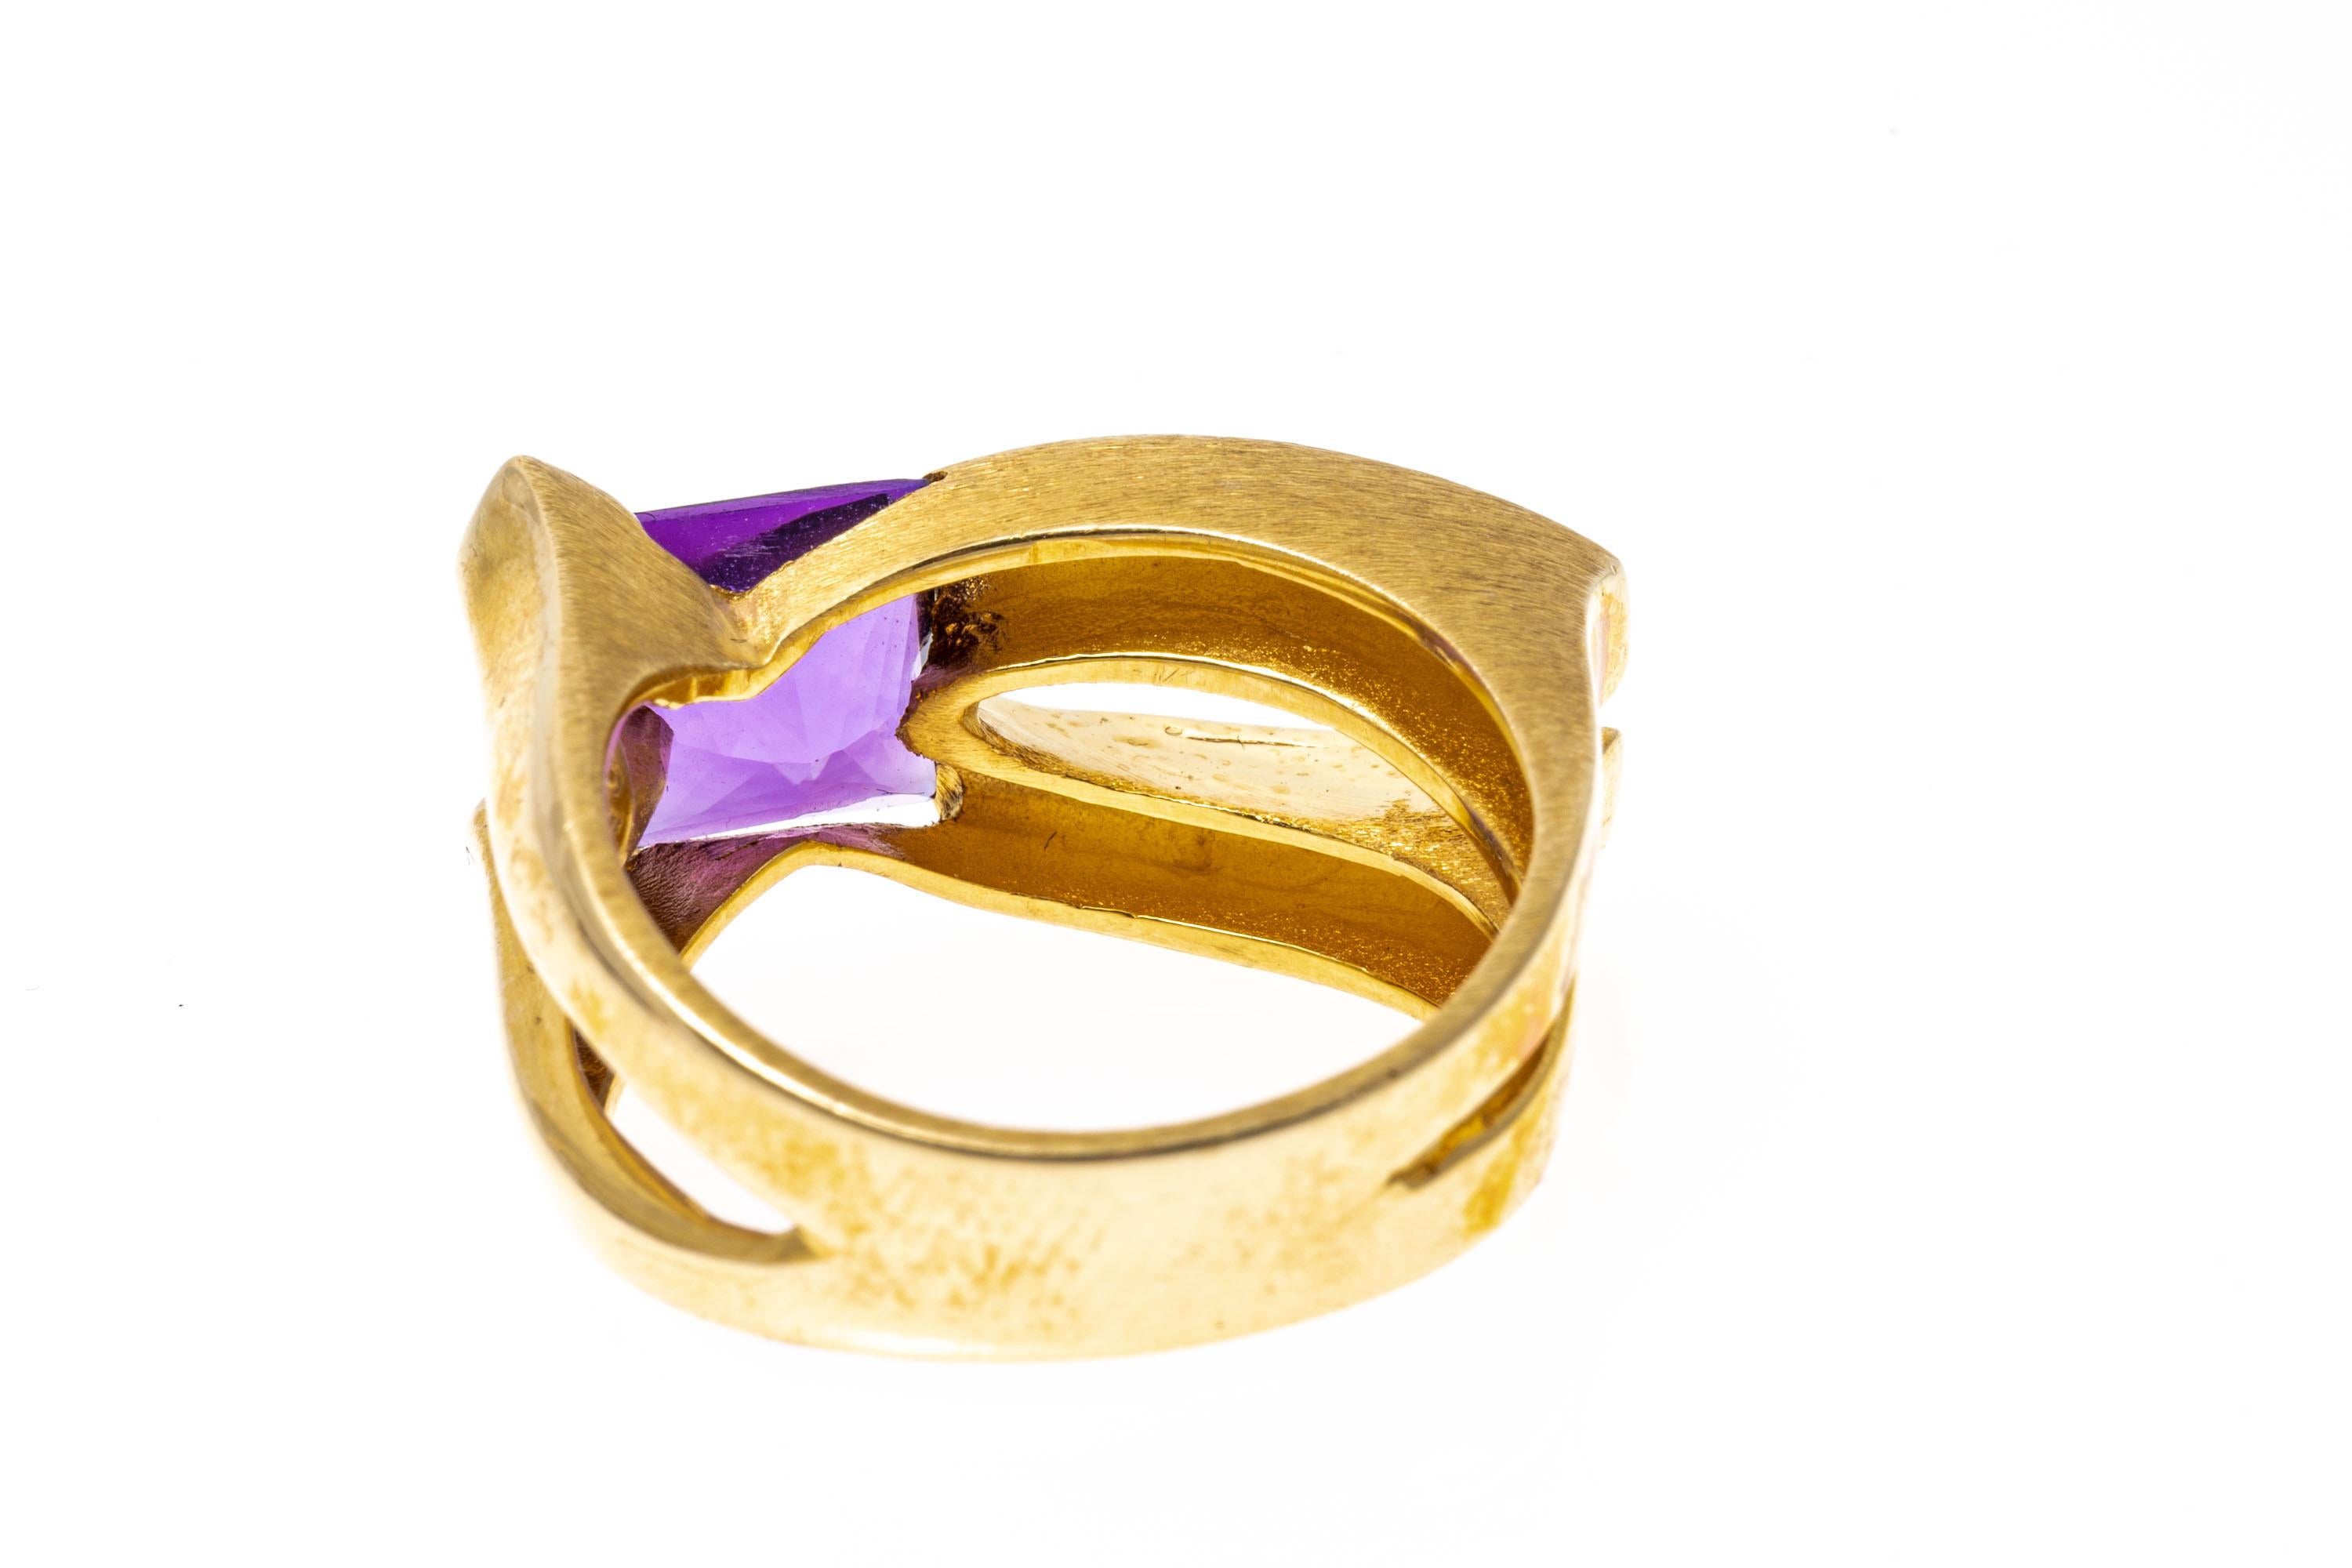 14k yellow gold ring. This unusual ring has a square, half-faceted, and half cabochon cut, medium to dark purple color amethyst, offset into a wide, elongated contemporary split, decorated with broad, split shoulders.
Marks: 14k
Dimensions: 15/16